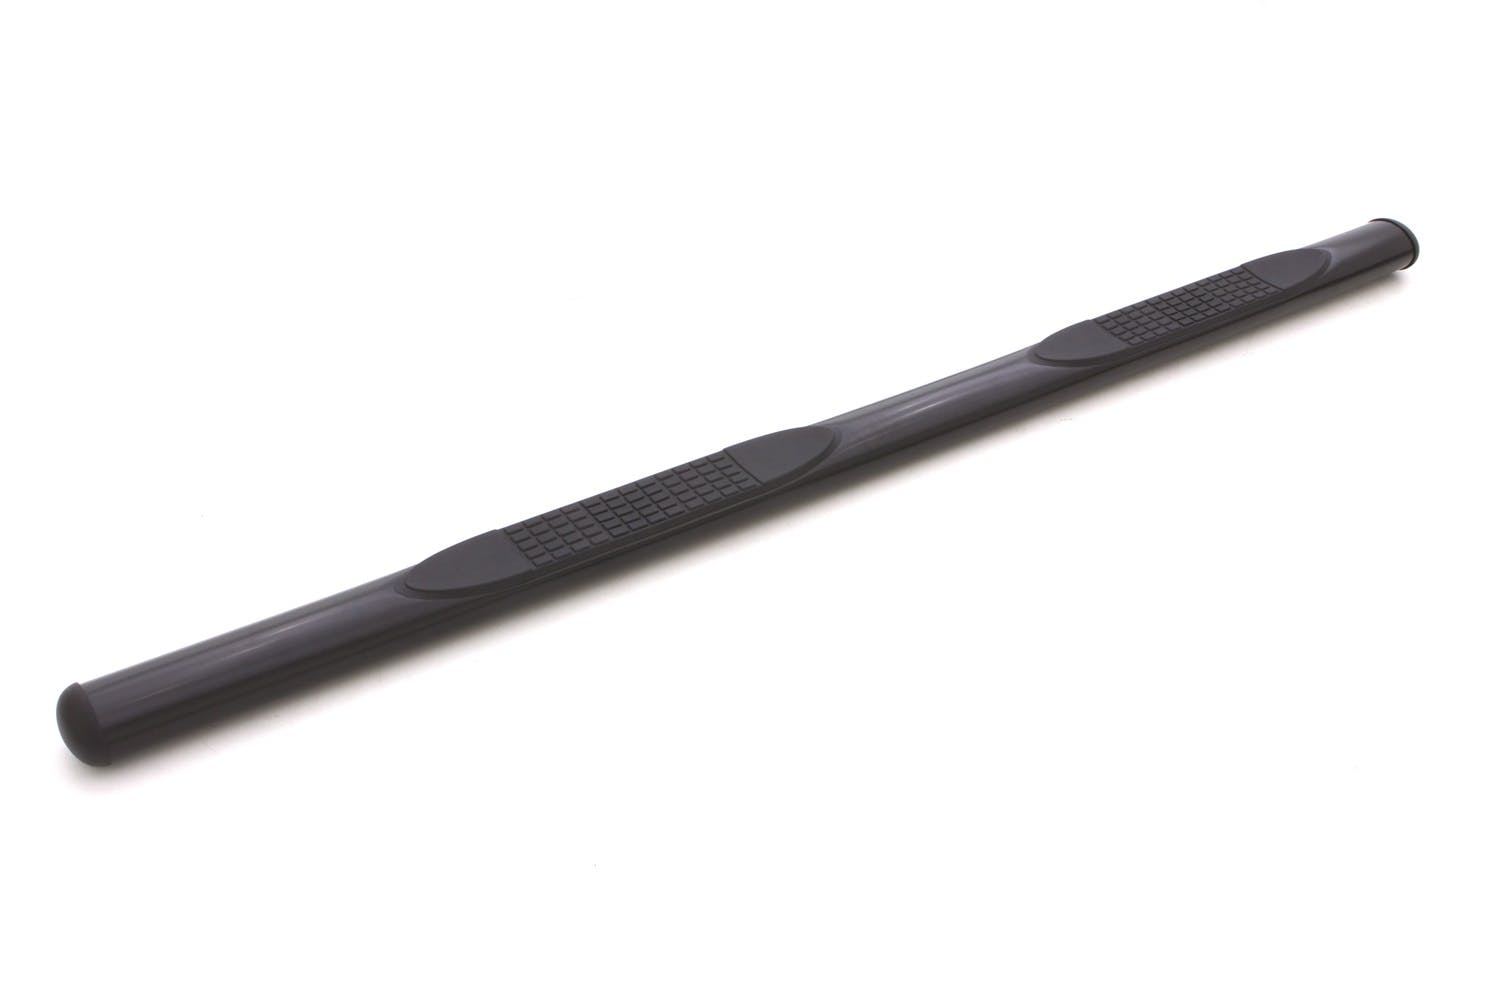 LUND 23684781 4 Inch Oval Straight Nerf Bar - Black 4 In OVAL STRAIGHT STEEL